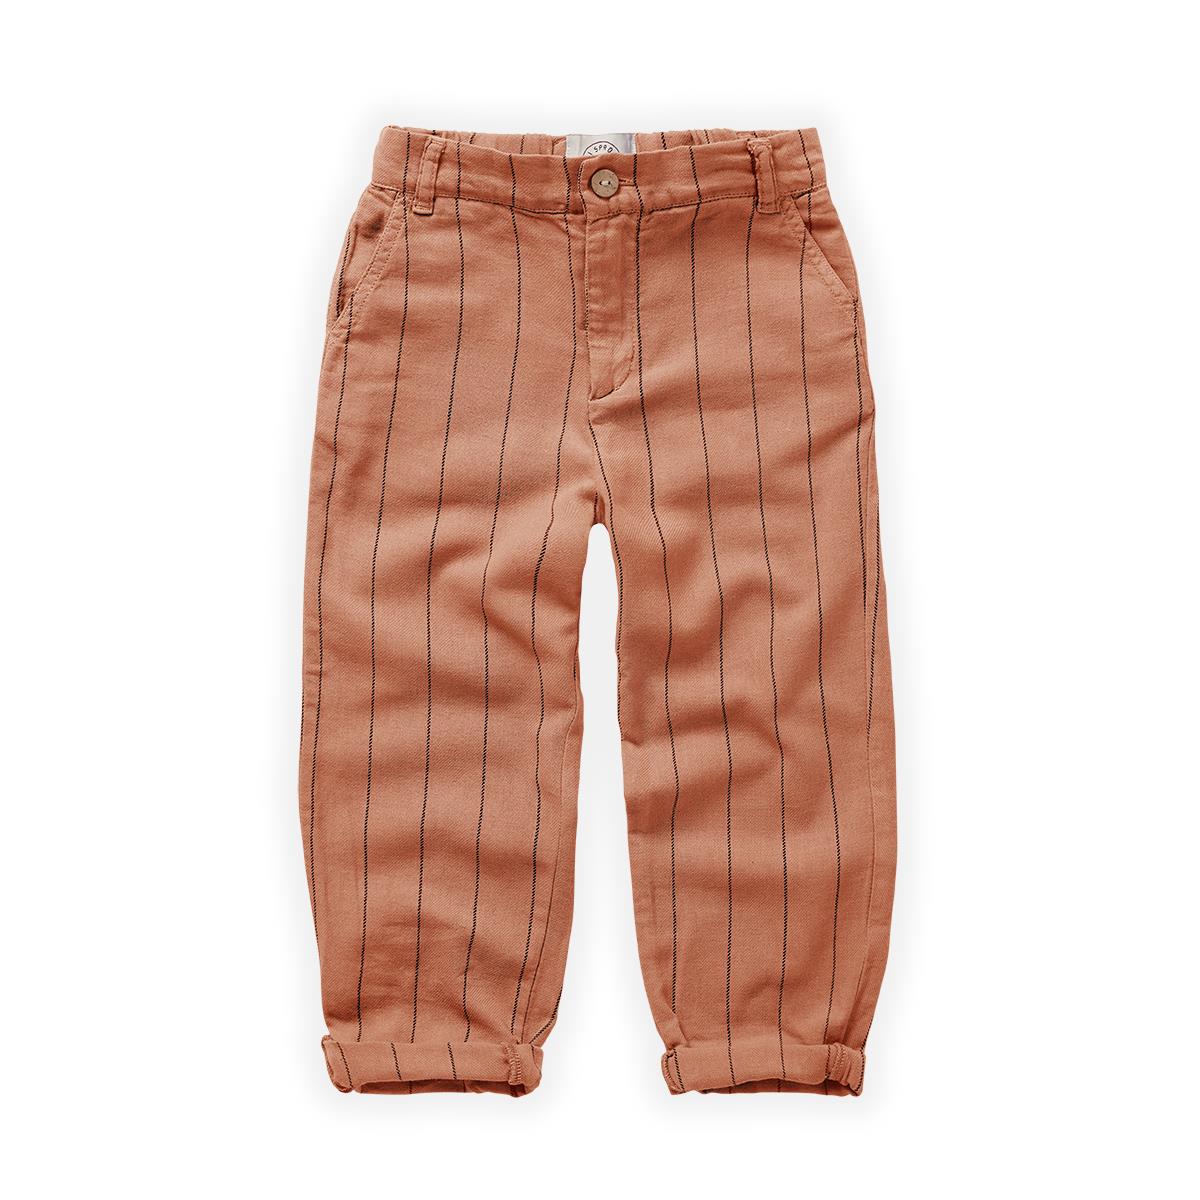 Sproet & Sprout - Chino pants stripe print